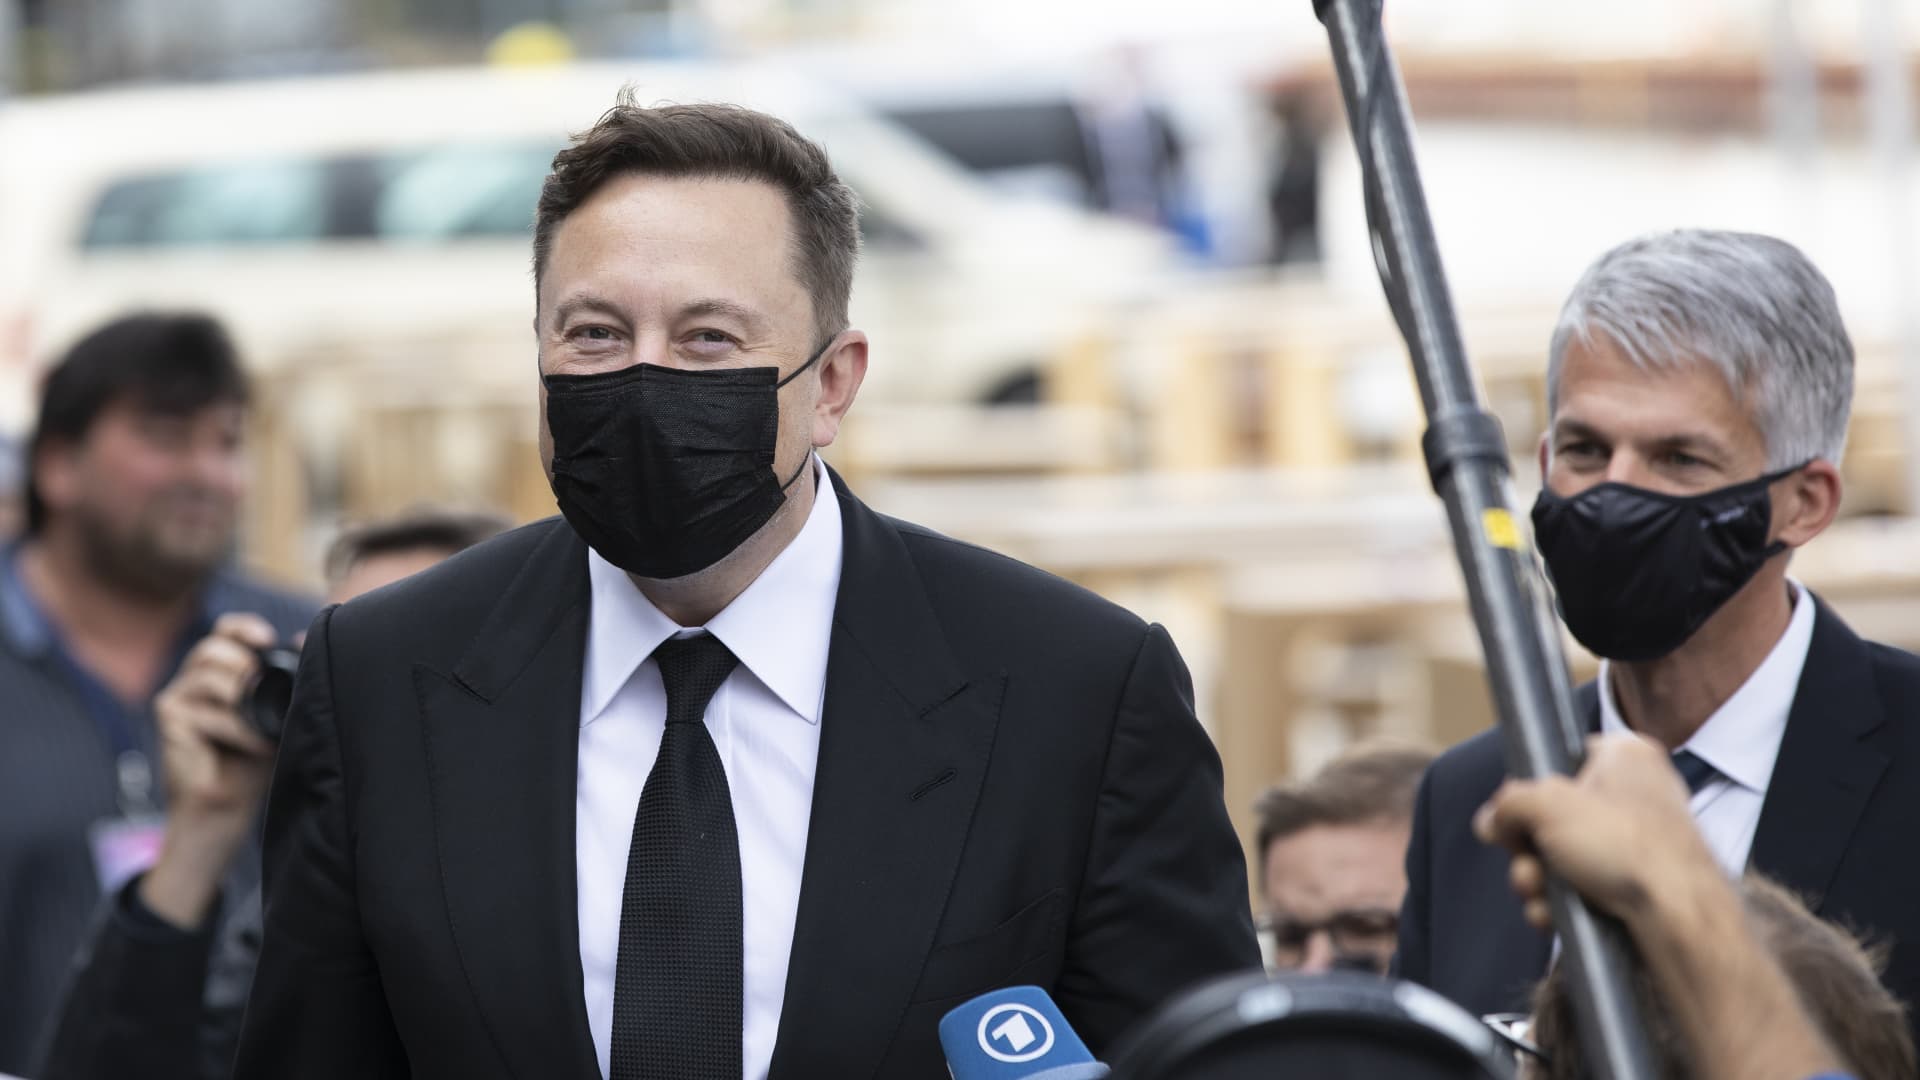 BERLIN, GERMANY - SEPTEMBER 02: Tesla head Elon Musk arrives at a retreat of the German Christian Democrats CDU/CSU Bundestag faction on September 02, 2020 in Berlin, Germany. Musk is currently in Germany where he met with vaccine maker CureVac, with which Tesla has a cooperation to build devices for producing RNA vaccines, yesterday. Today he is rumoured to also the site of the new Gigafactory under construction near Berlin.